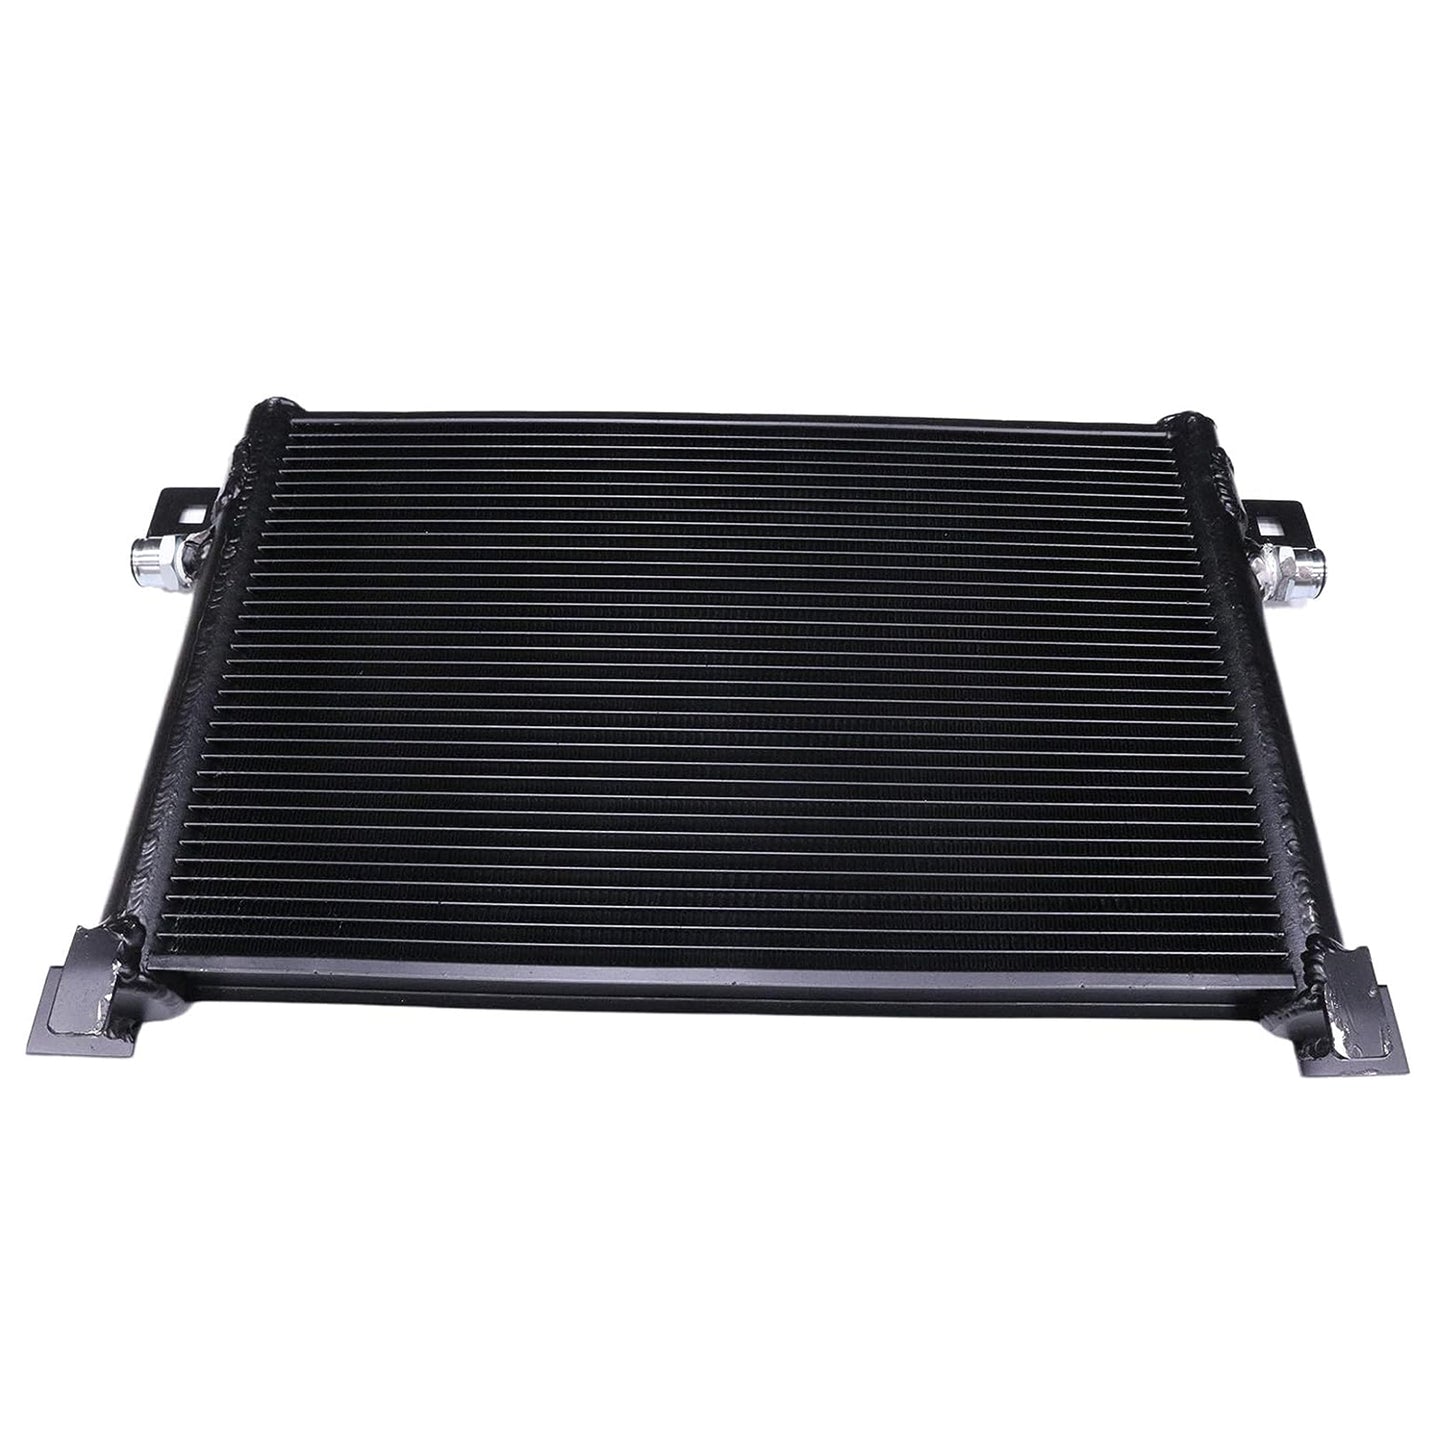 6678156 Oil Exchanger Cooler Compatible With Bobcat A300 S220 S250 S300 S330 T250